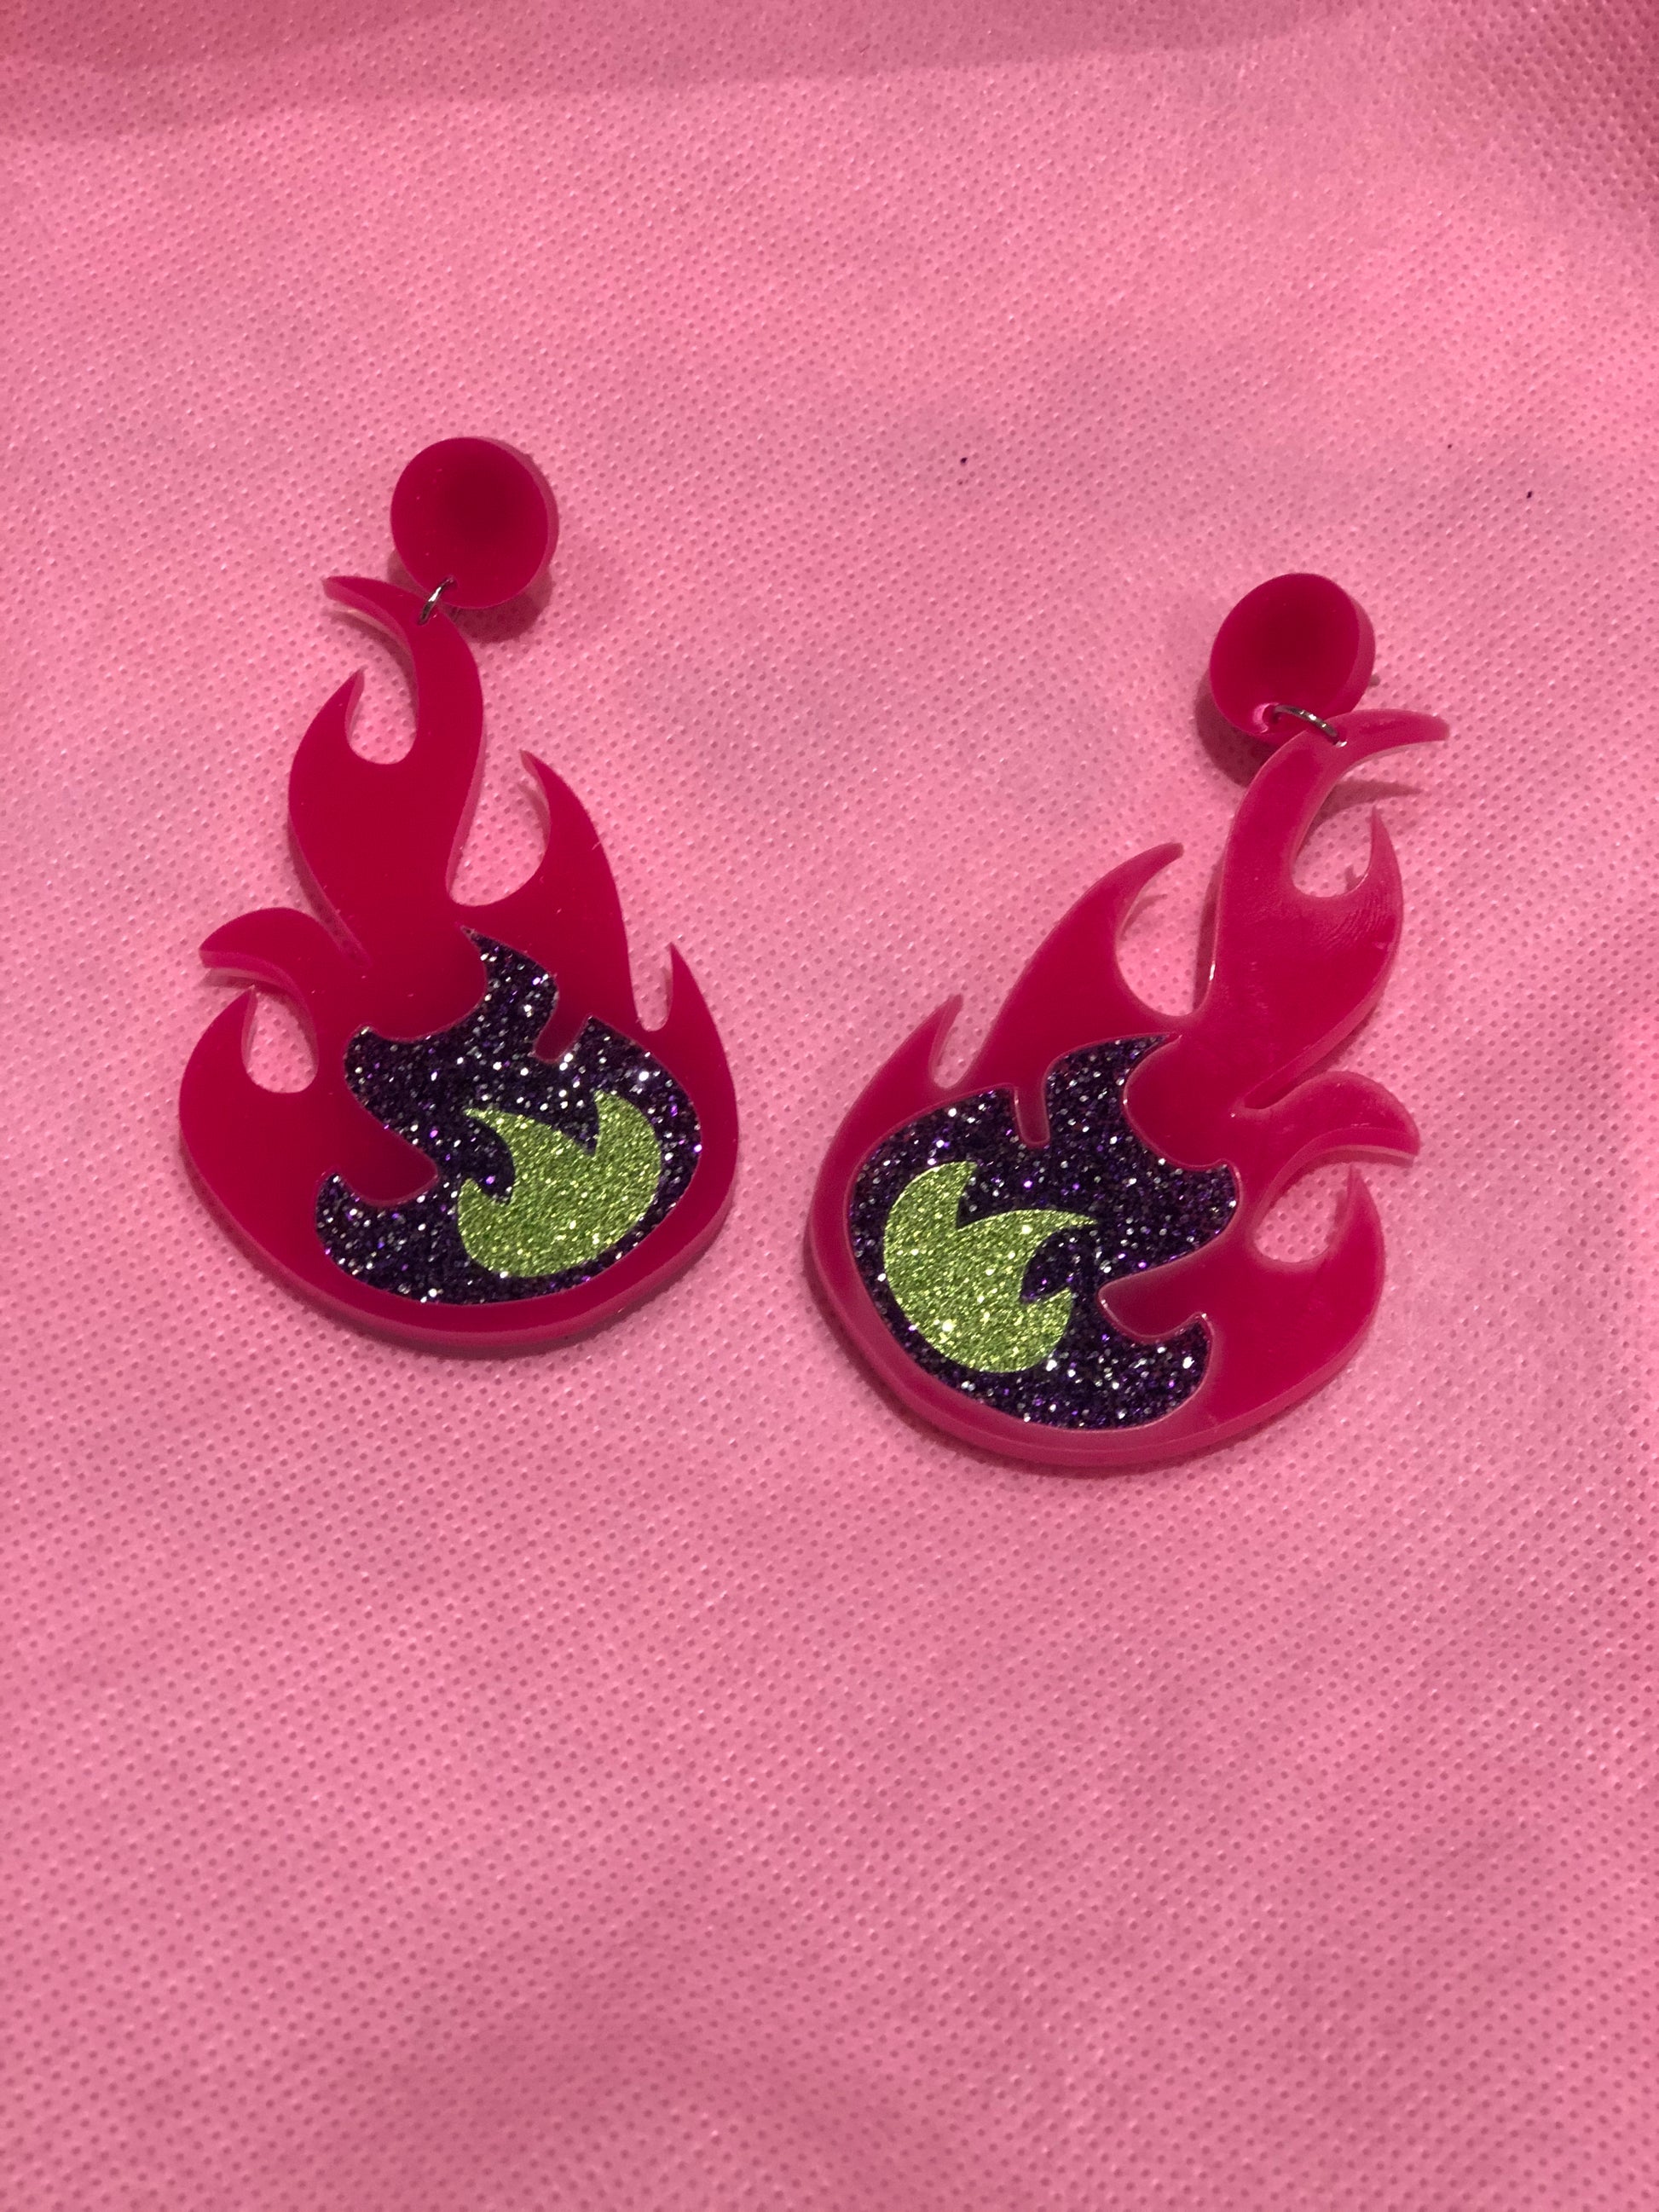 Hot Pink Glitter Flames Earrings by No Basic Bombshell - Spark Pretty